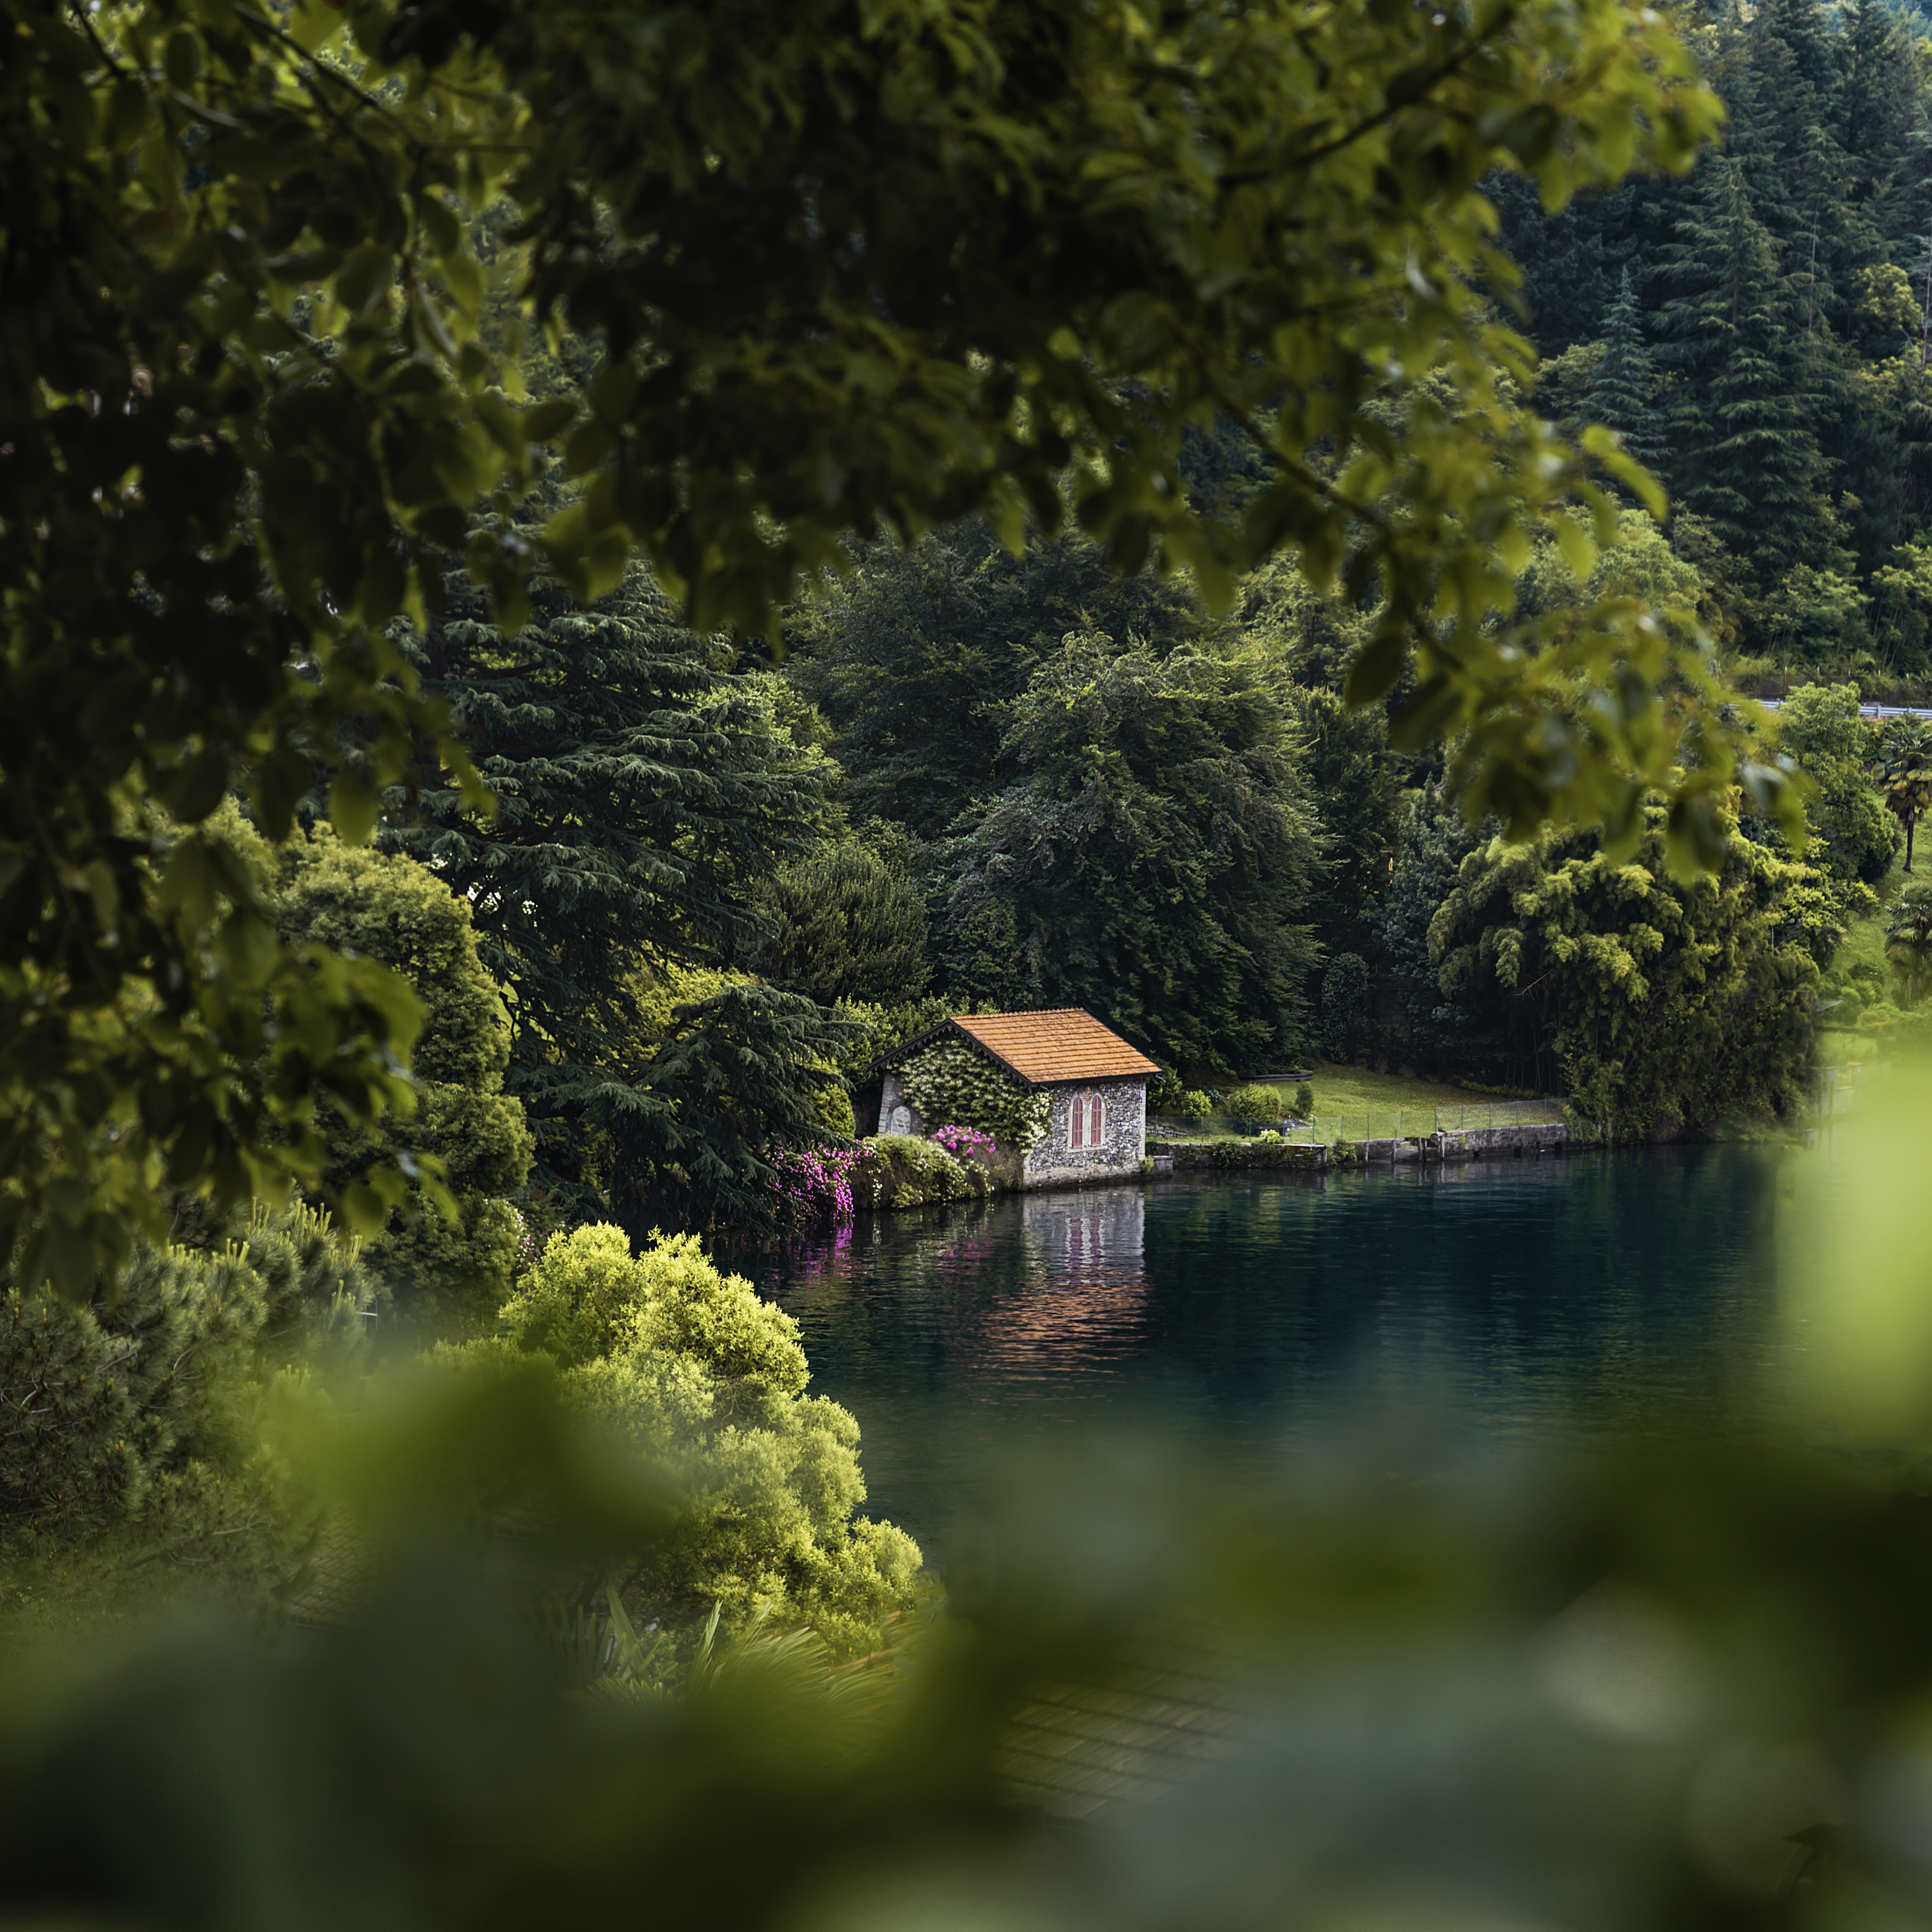 android nature, small house, lodge, comfort, trees, lake, coziness